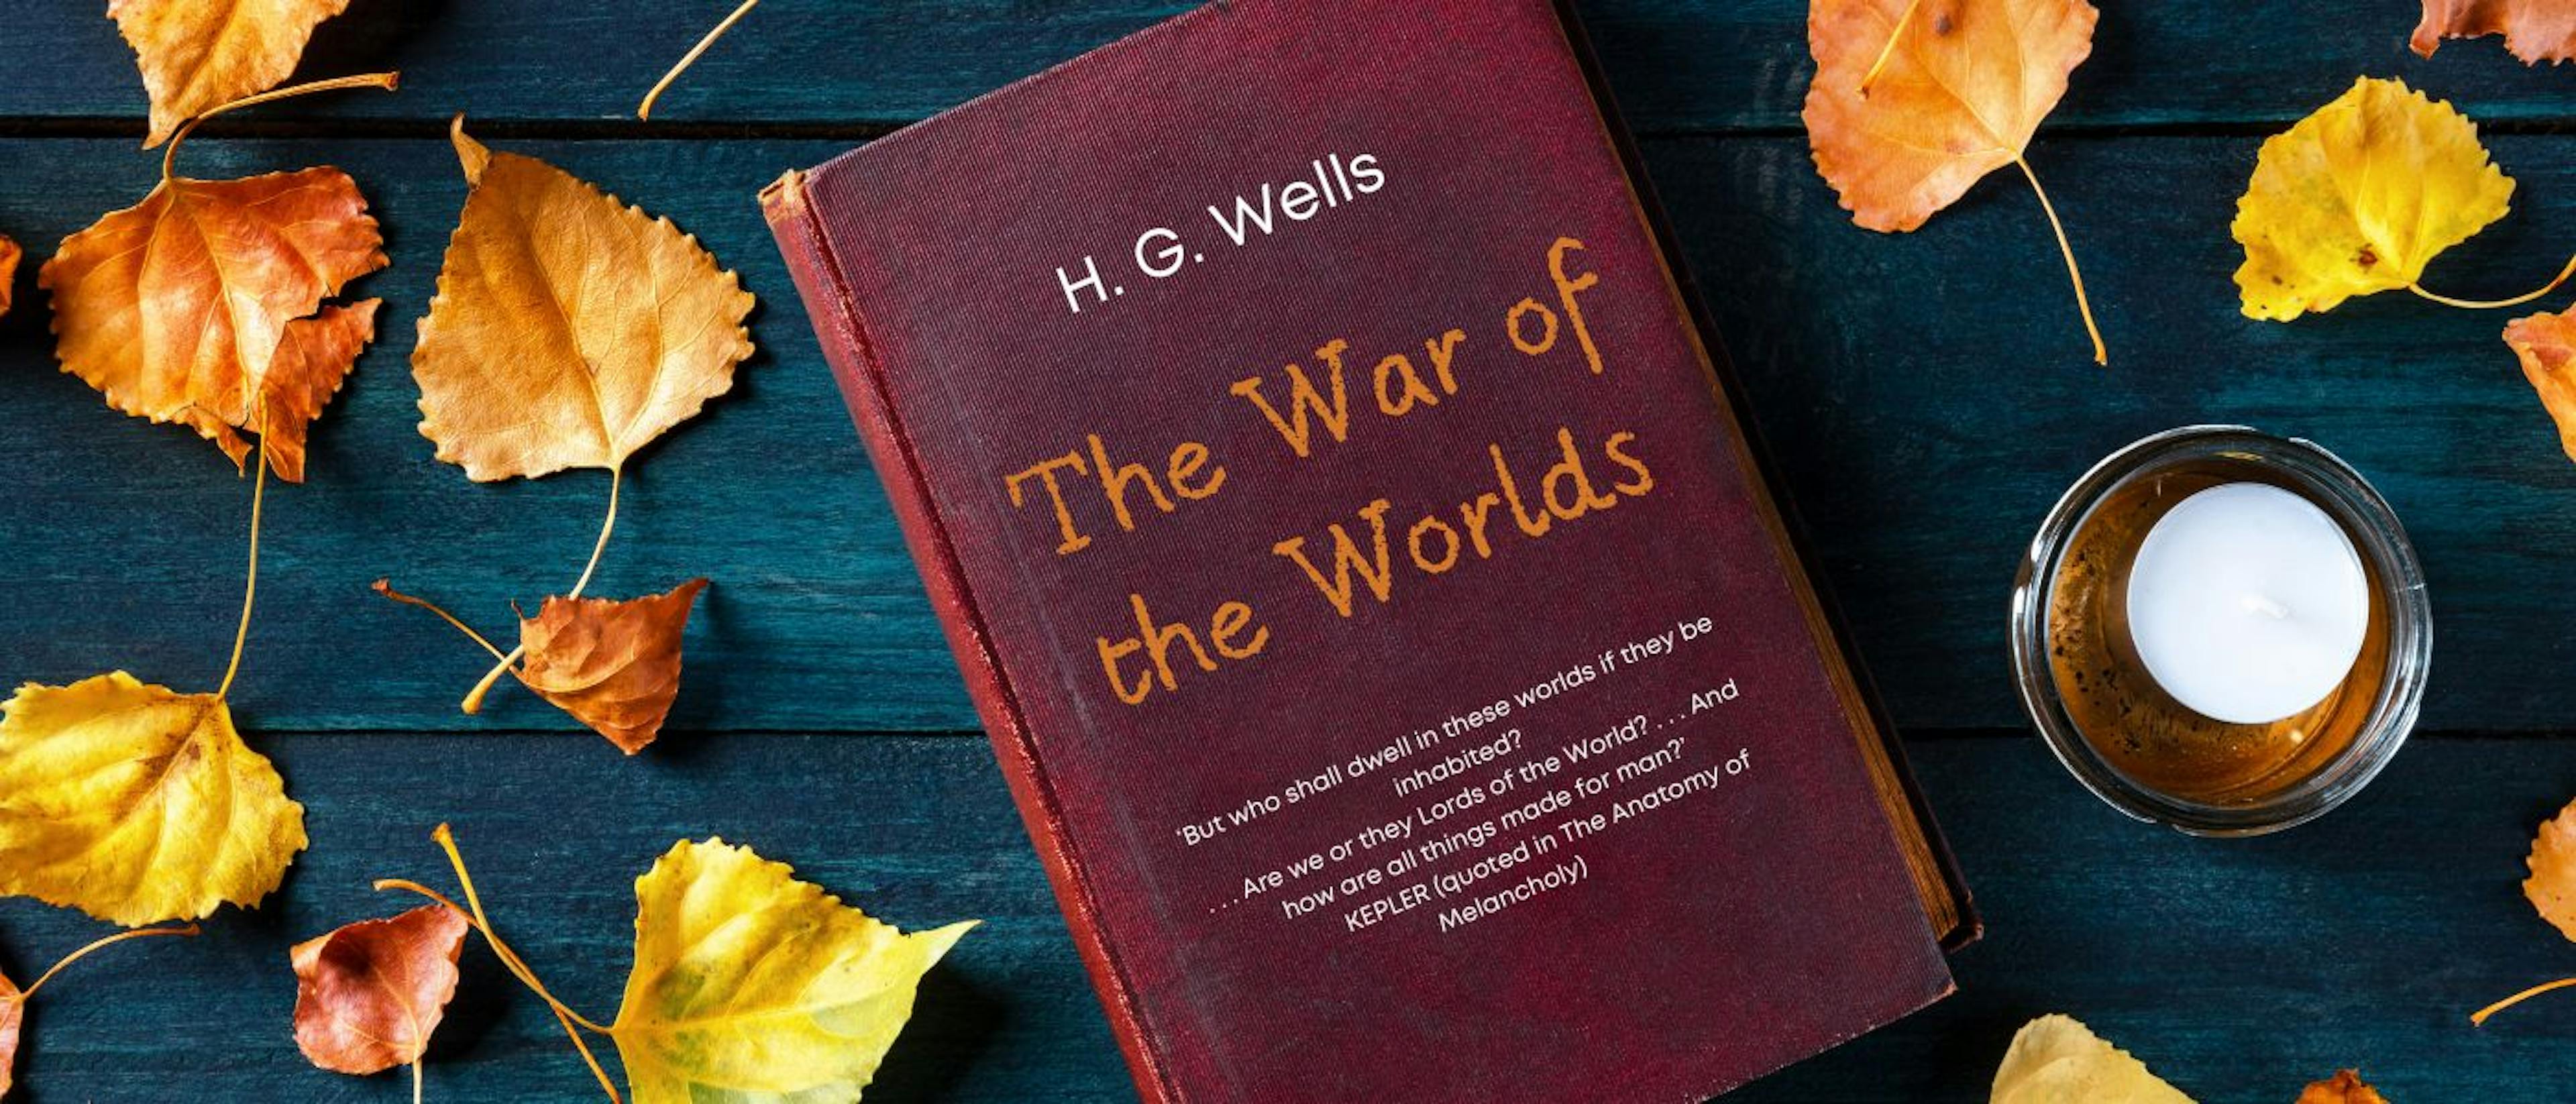 featured image - The War of the Worlds, by H. G. Wells - IV: THE CYLINDER OPENS